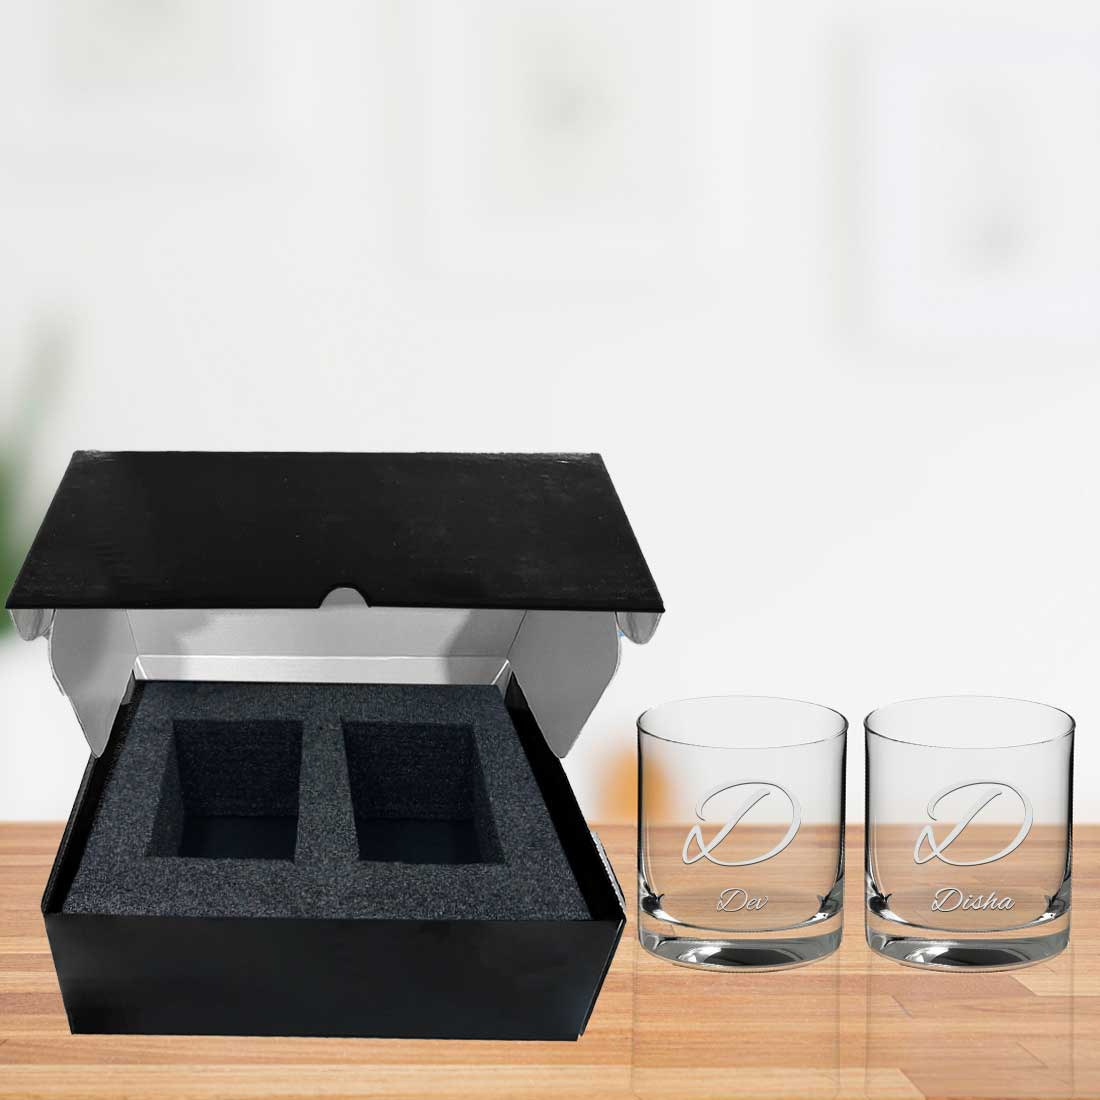 Personalized Whiskey Glass Set in Black Gift Box